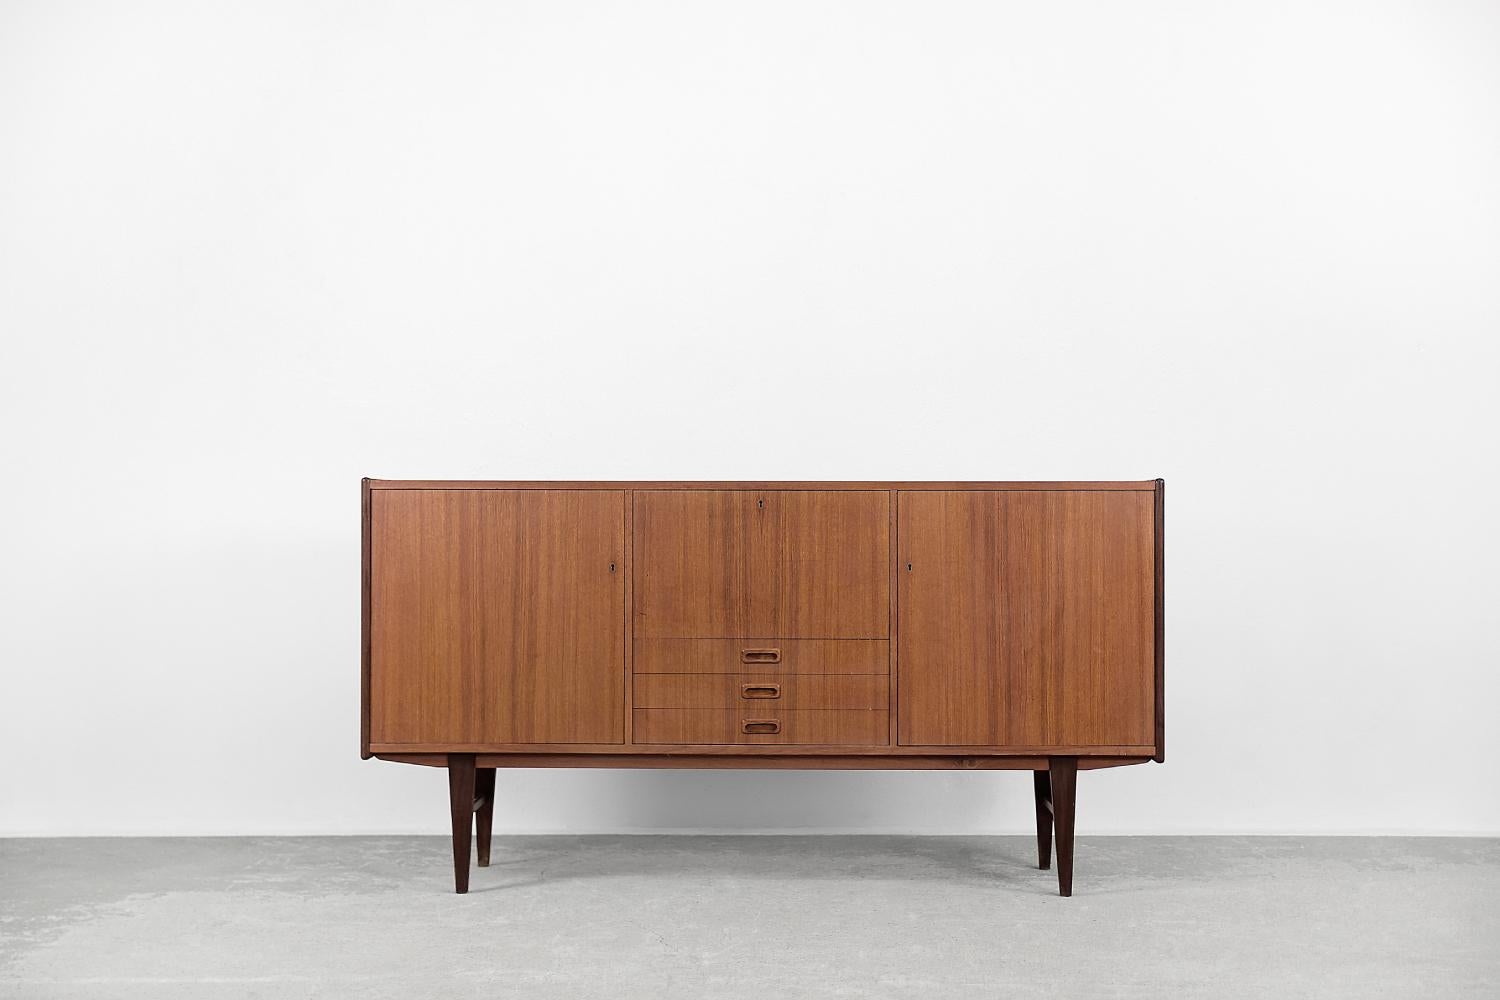 This sideboard was made in Sweden, probably in 1964. It is finished with teak wood with a warm color and regular graining. It has lockable cabinets and practical shelves. In the central part of the furniture is a vertically opening cabinet and